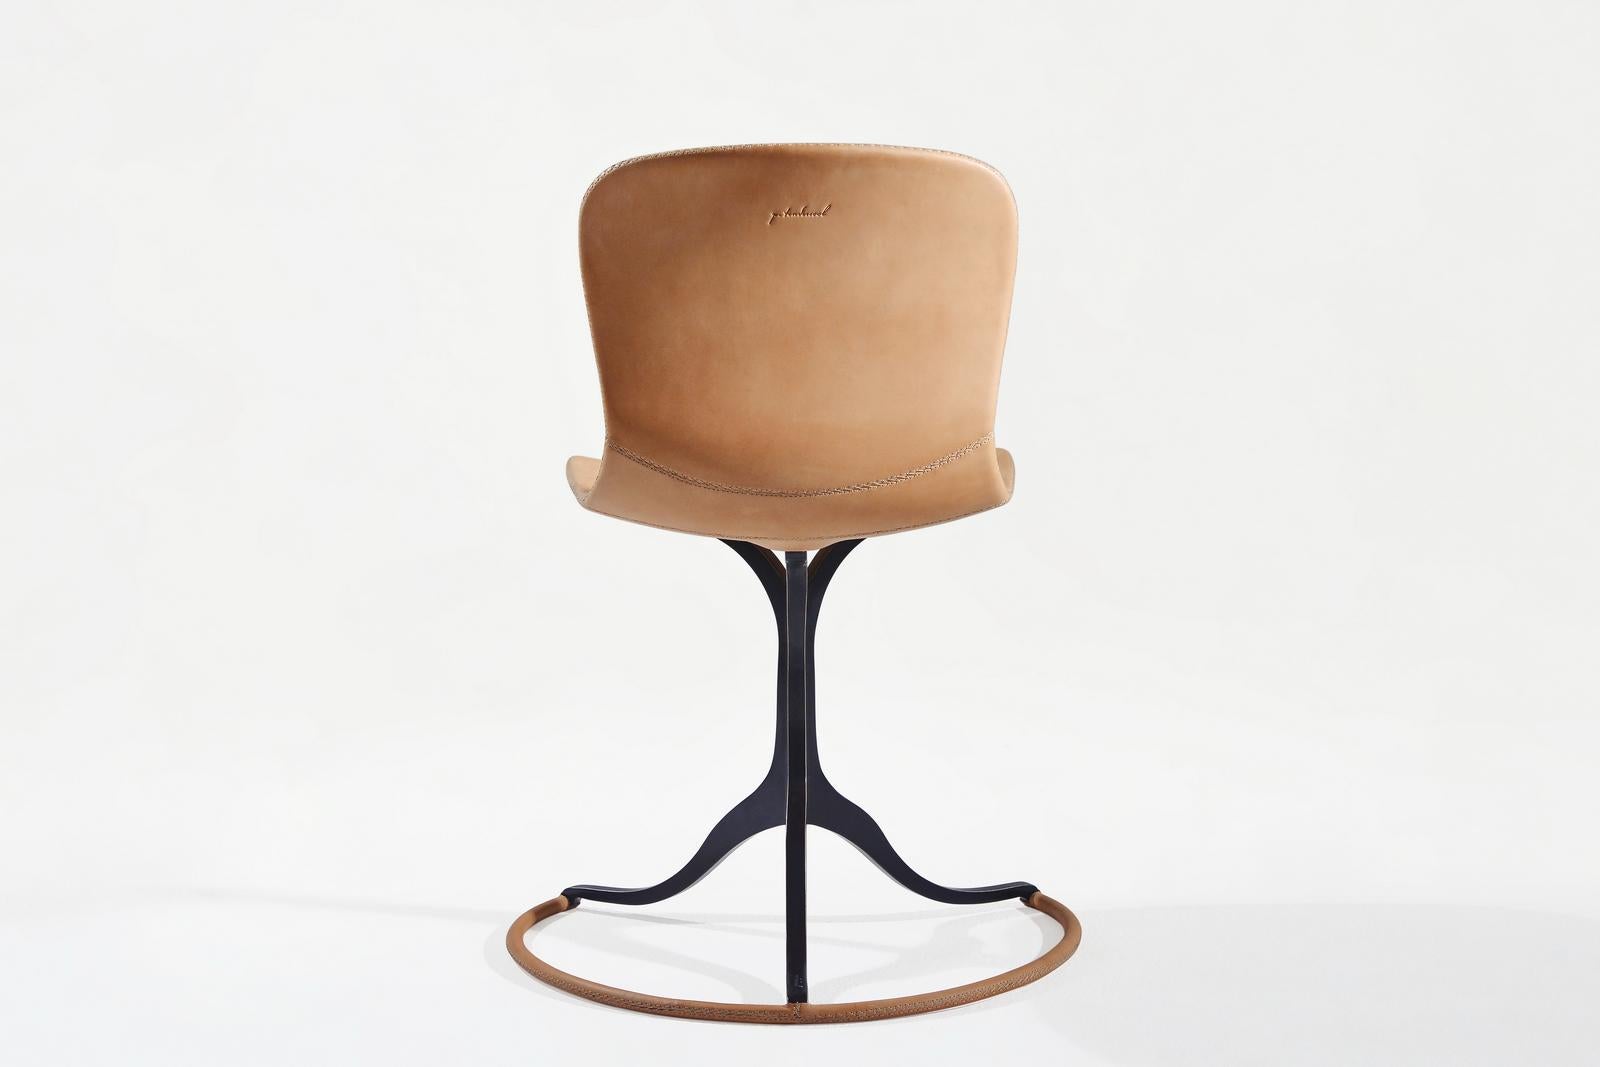 Bespoke Sand Cast Brass Chair in Châtaigne 'Mid Brown' Leather, by P. Tendercool In New Condition For Sale In Bangkok, TH